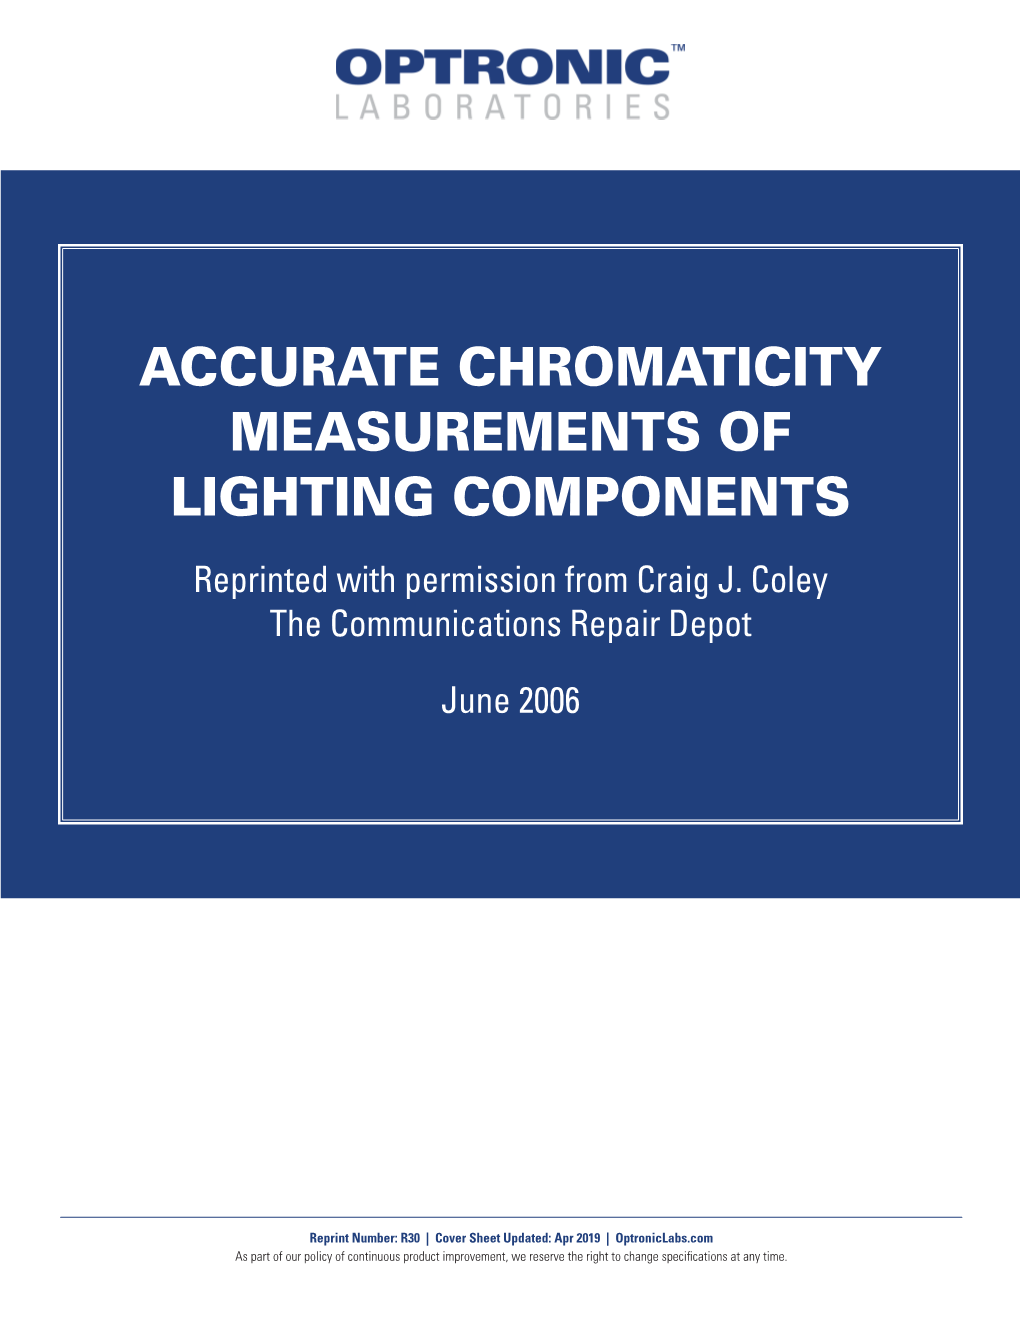 ACCURATE CHROMATICITY MEASUREMENTS of LIGHTING COMPONENTS Reprinted with Permission from Craig J